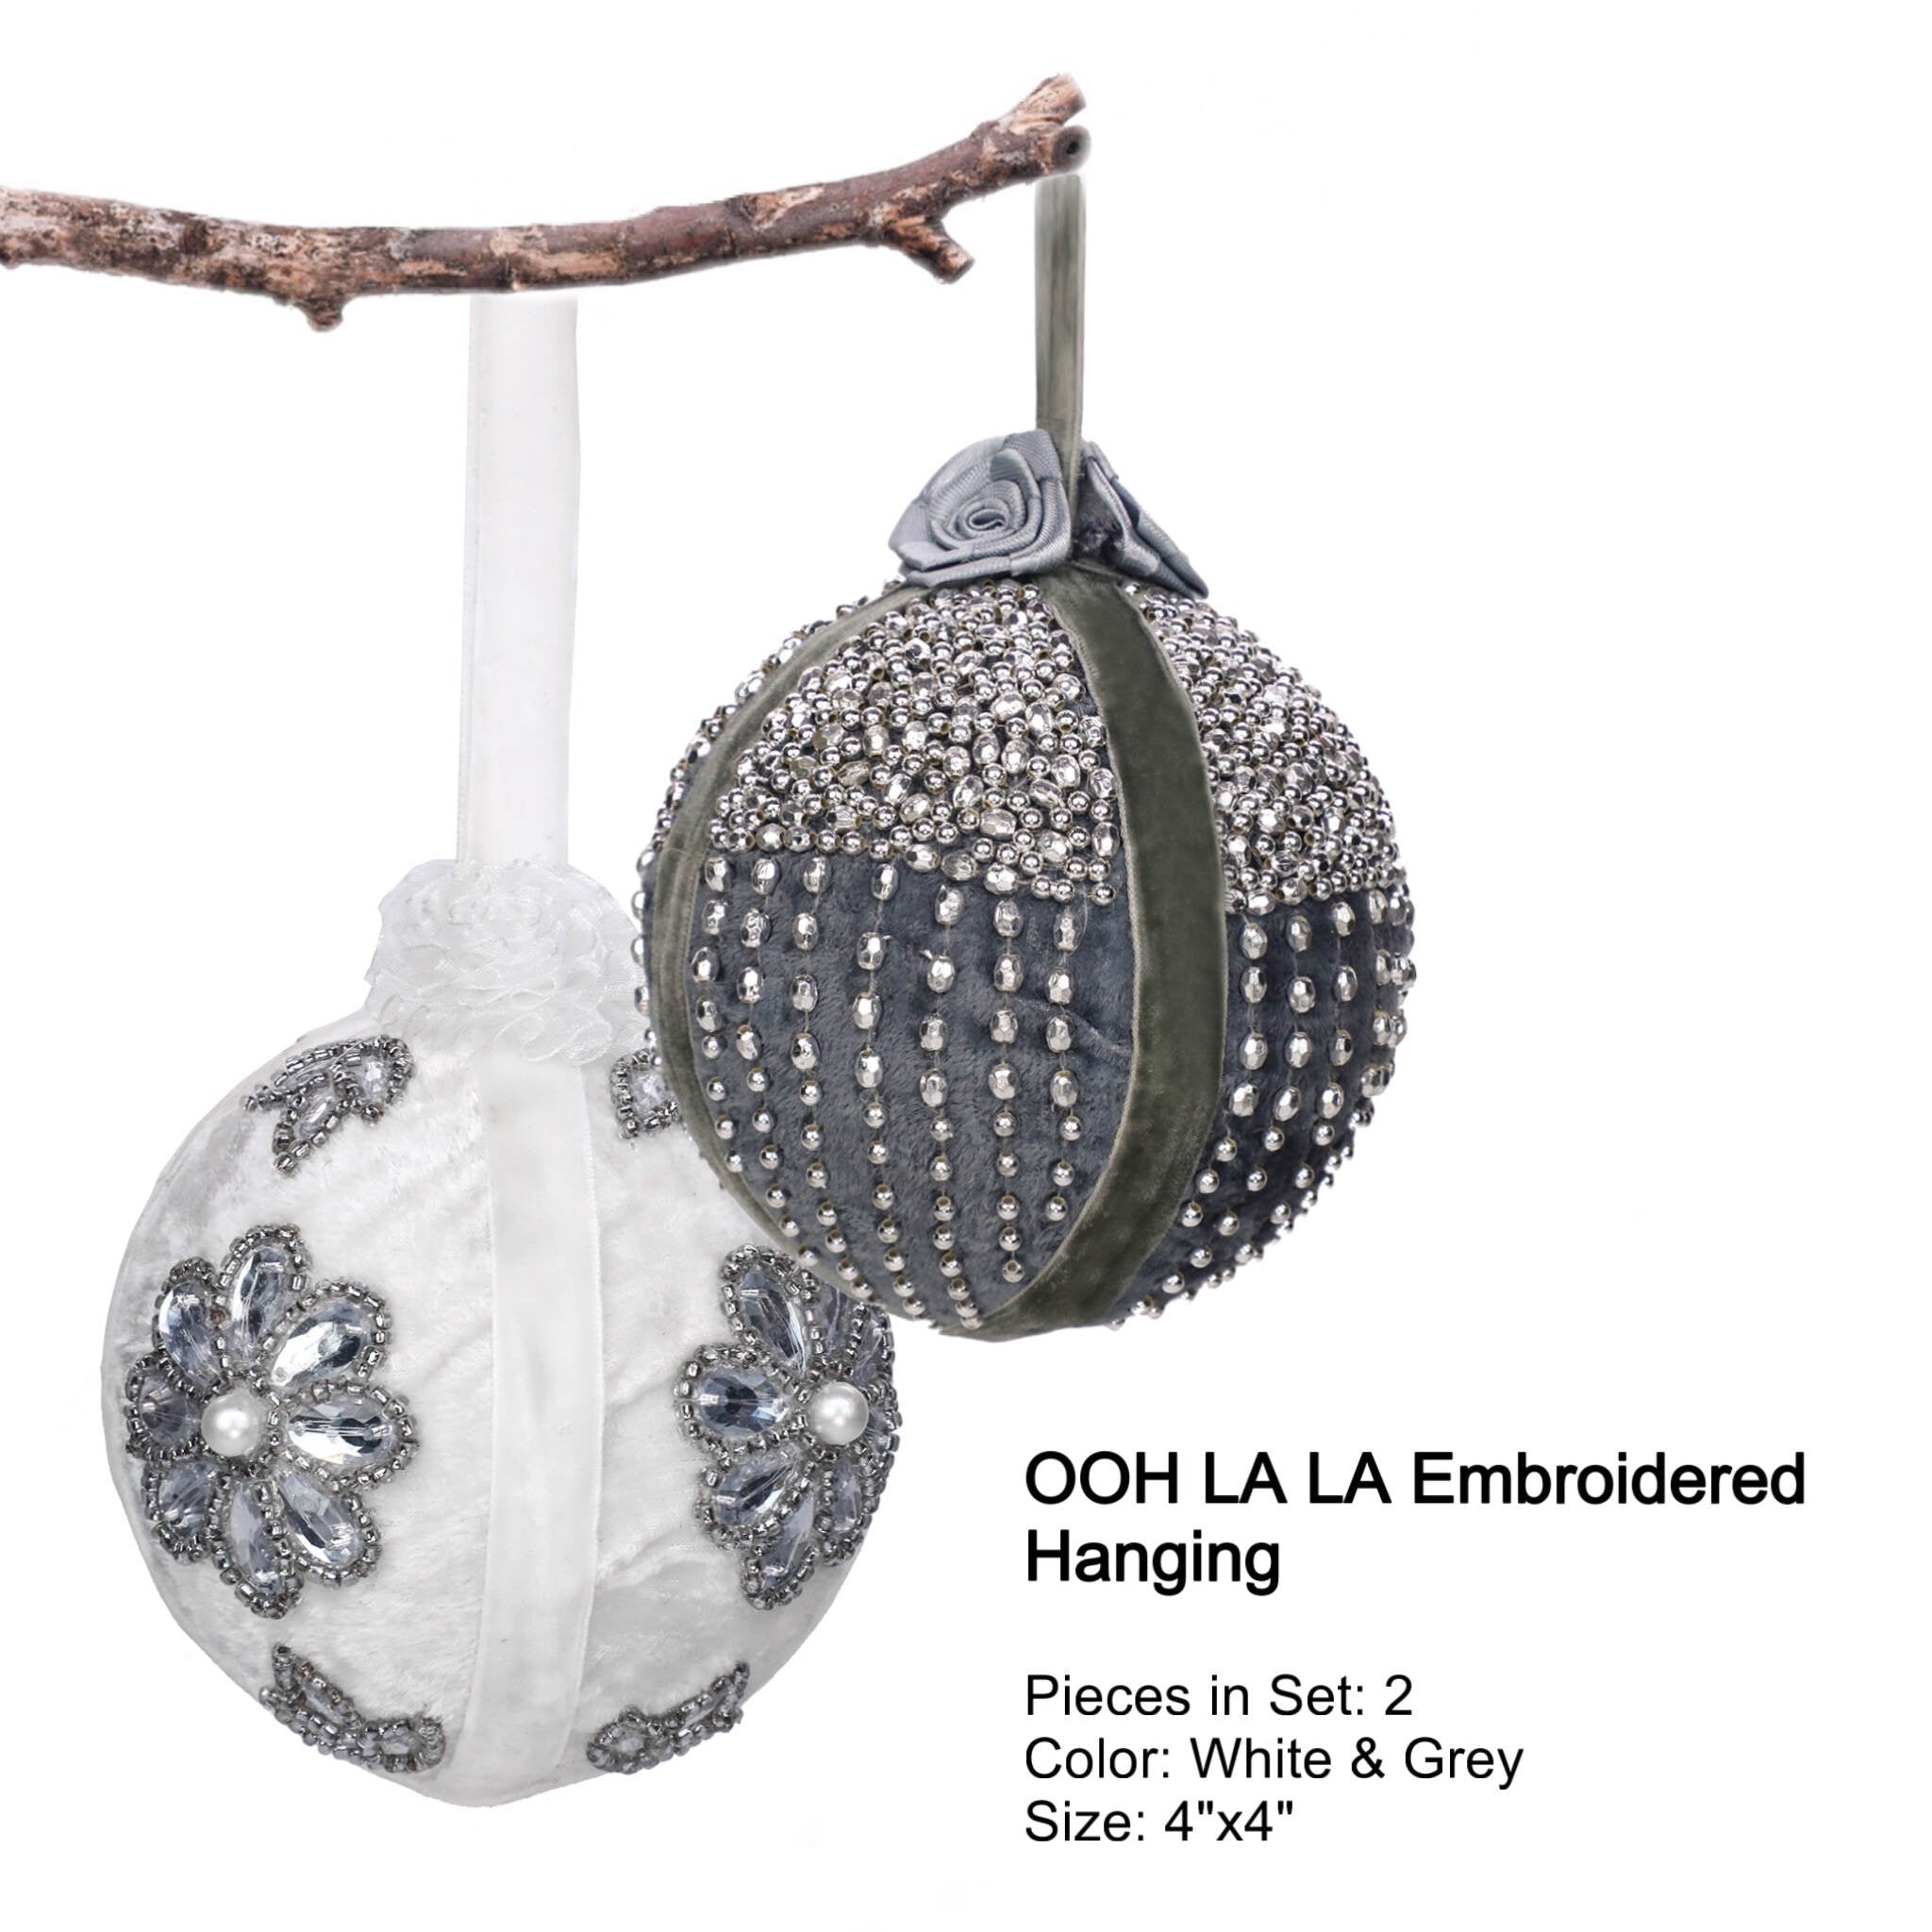 OOH LA LA Embroidered Hanging in White & Grey, Set of 2